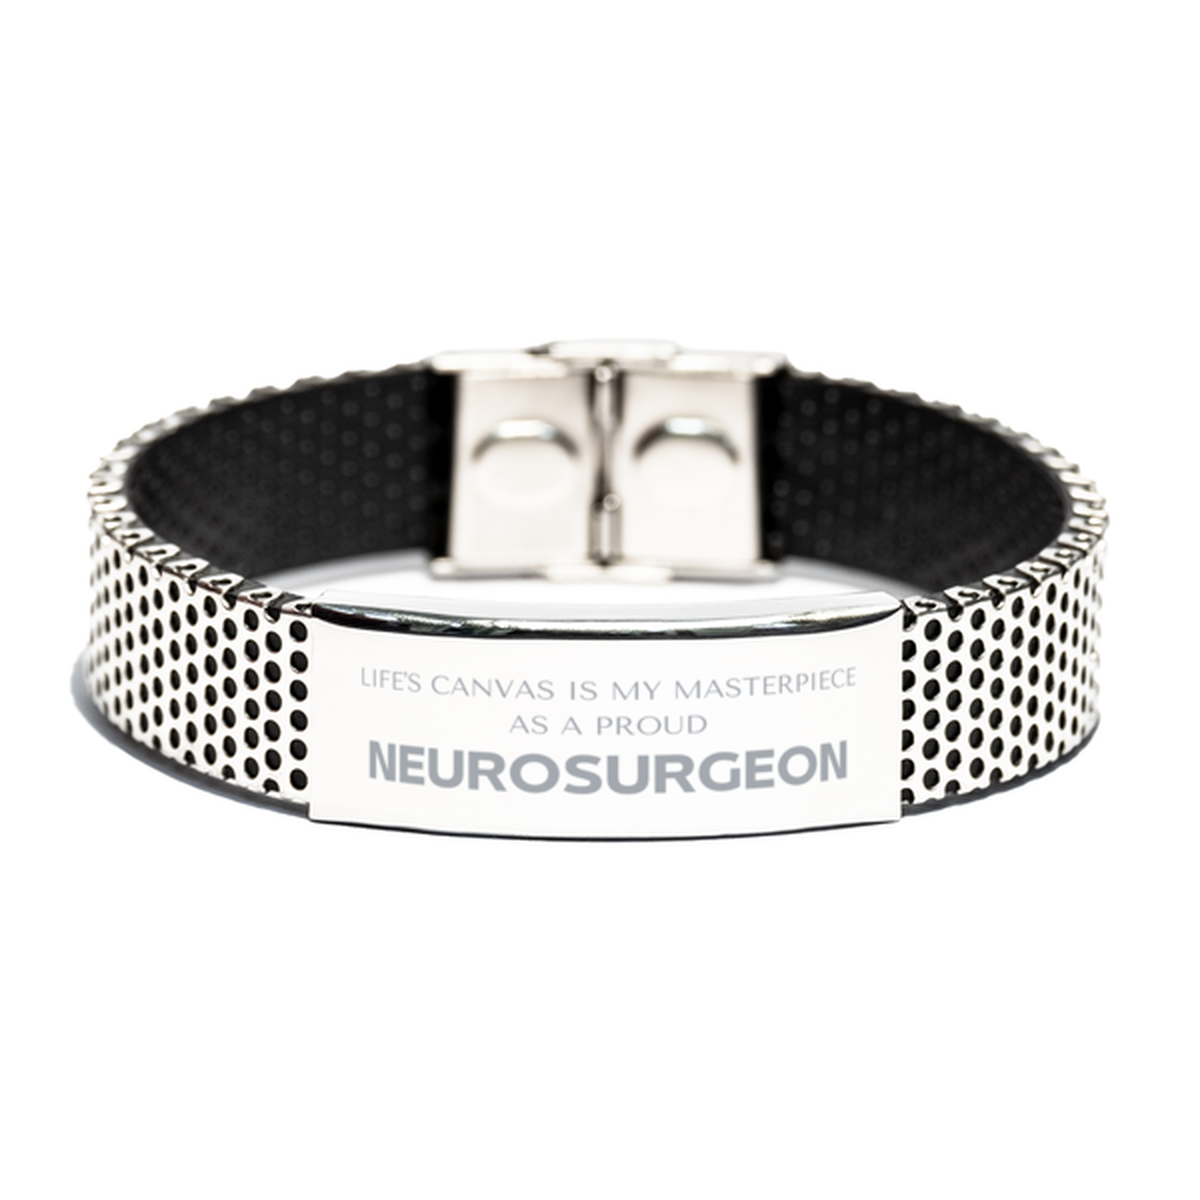 Proud Neurosurgeon Gifts, Life's canvas is my masterpiece, Epic Birthday Christmas Unique Stainless Steel Bracelet For Neurosurgeon, Coworkers, Men, Women, Friends